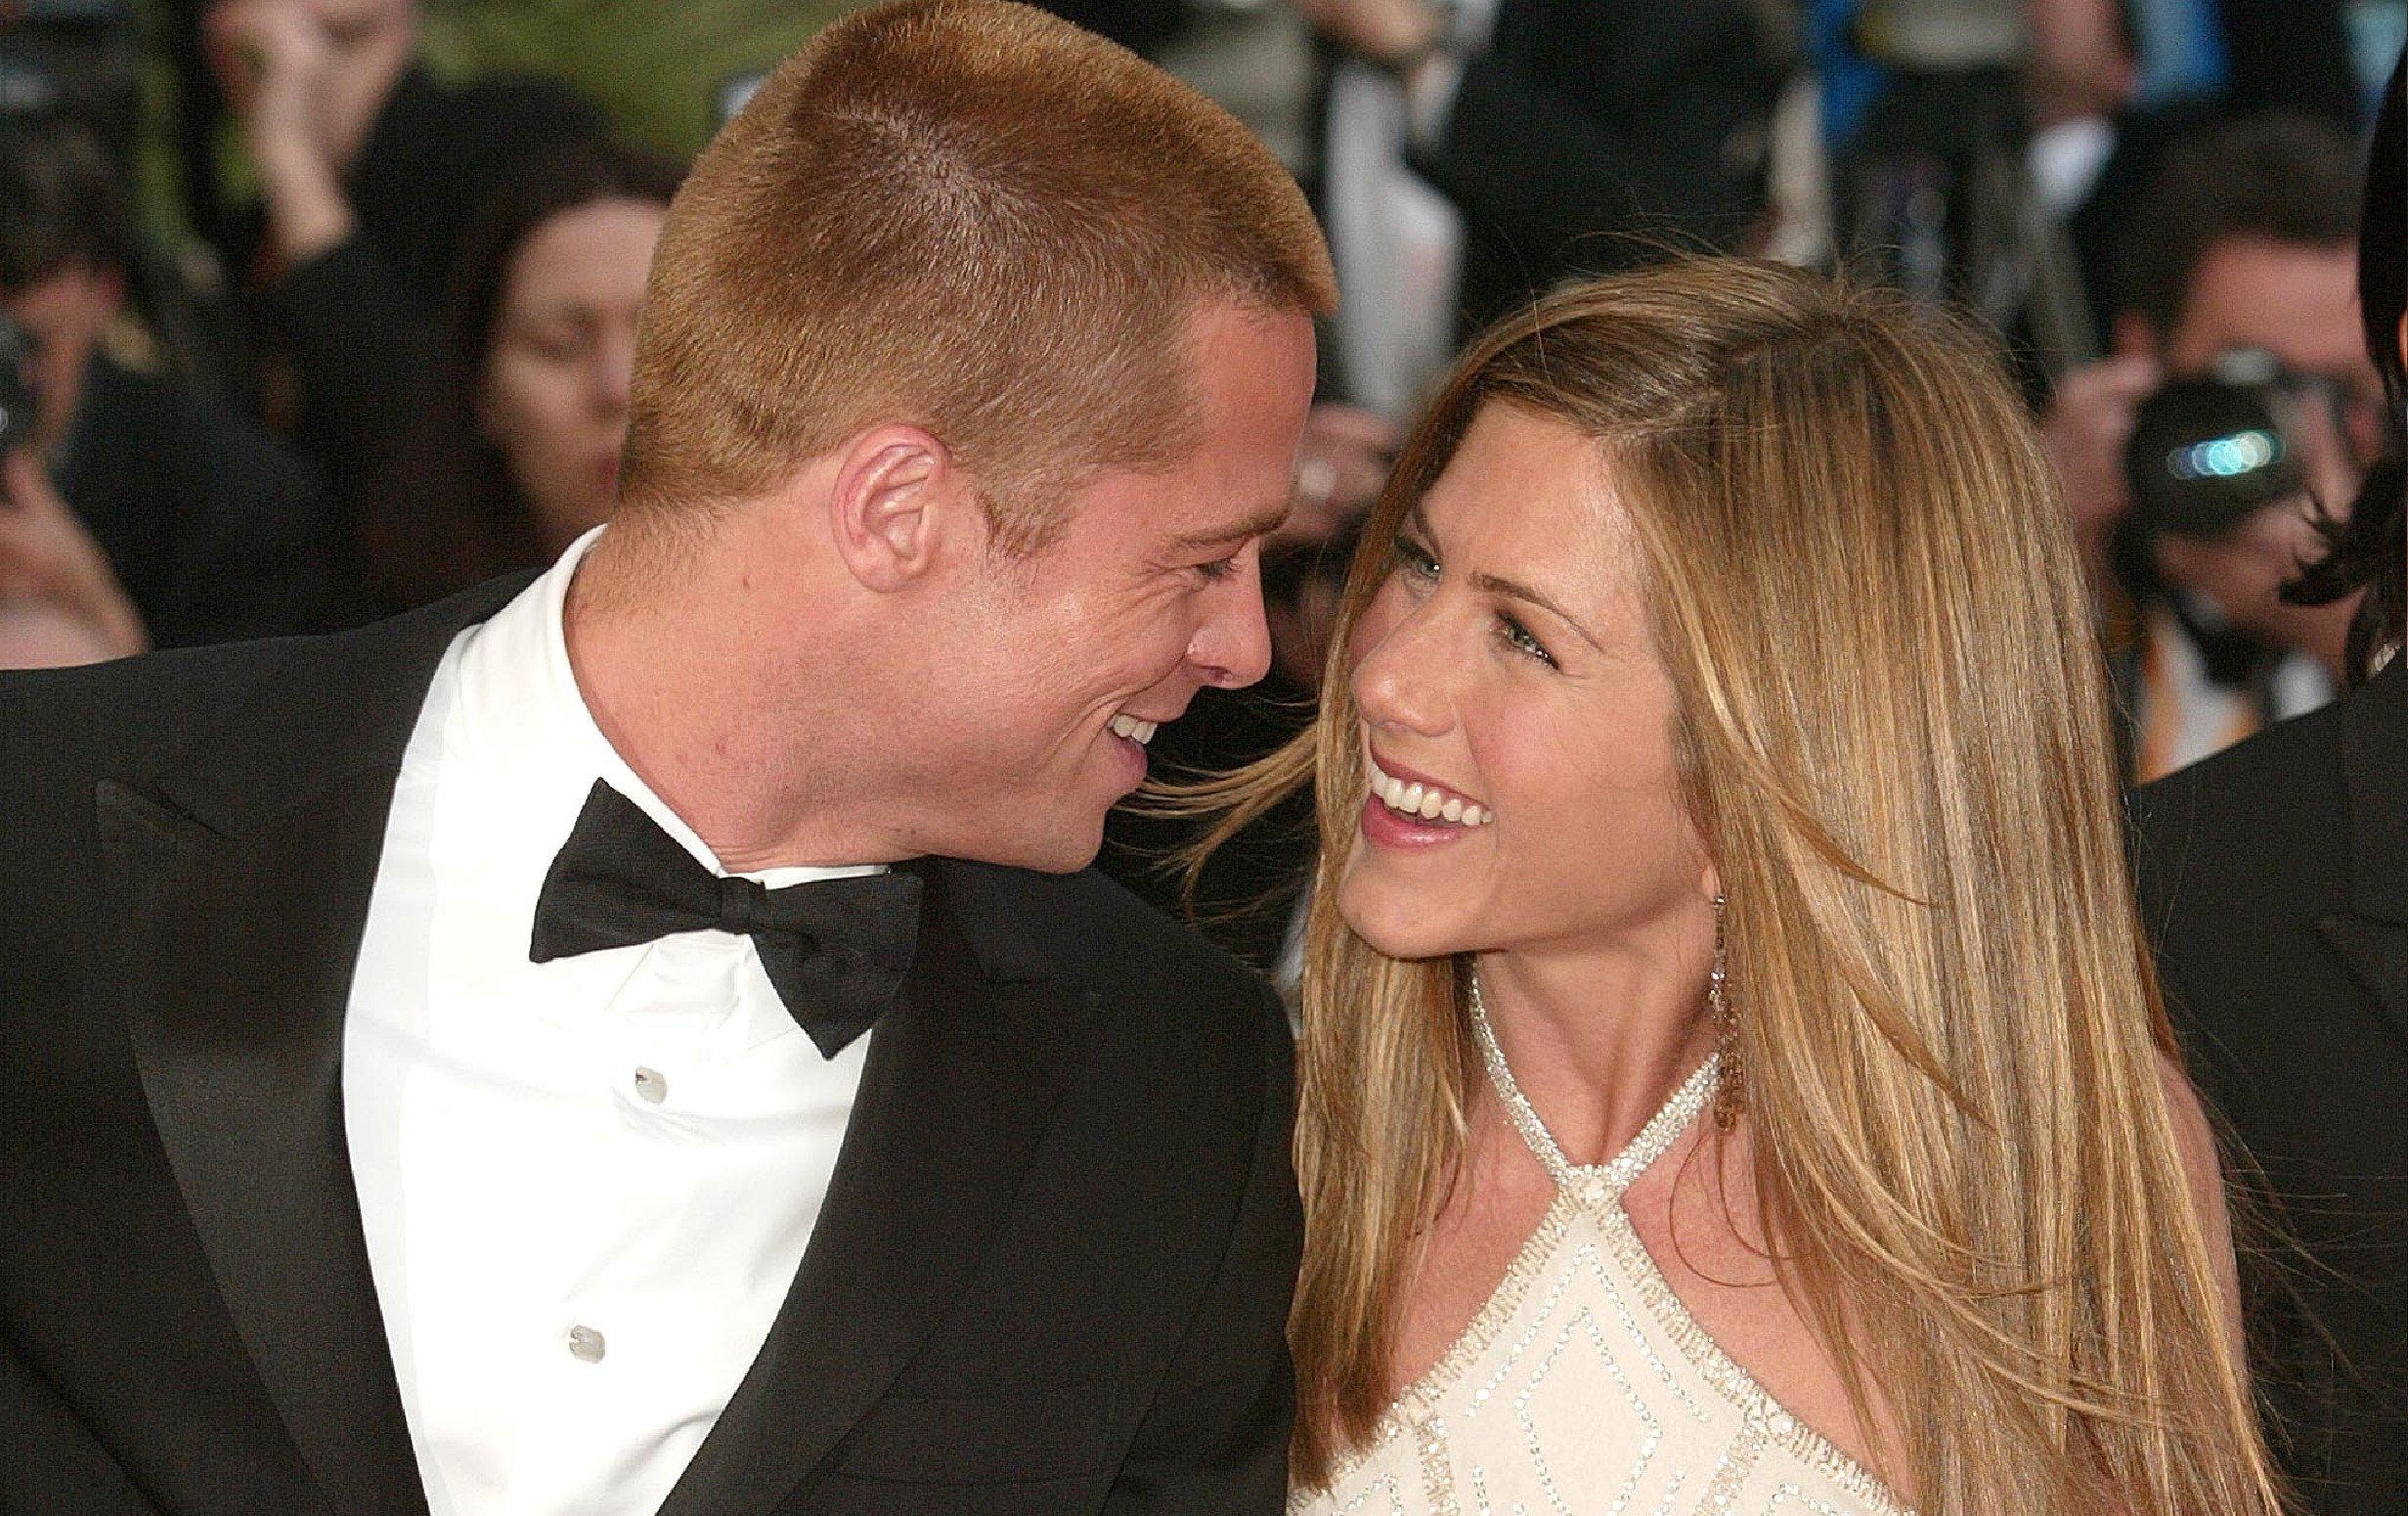 Brad Pitt Allegedly Flew To Hawaii To See Jennifer Aniston For Possible Romantic Getaway, According To Report